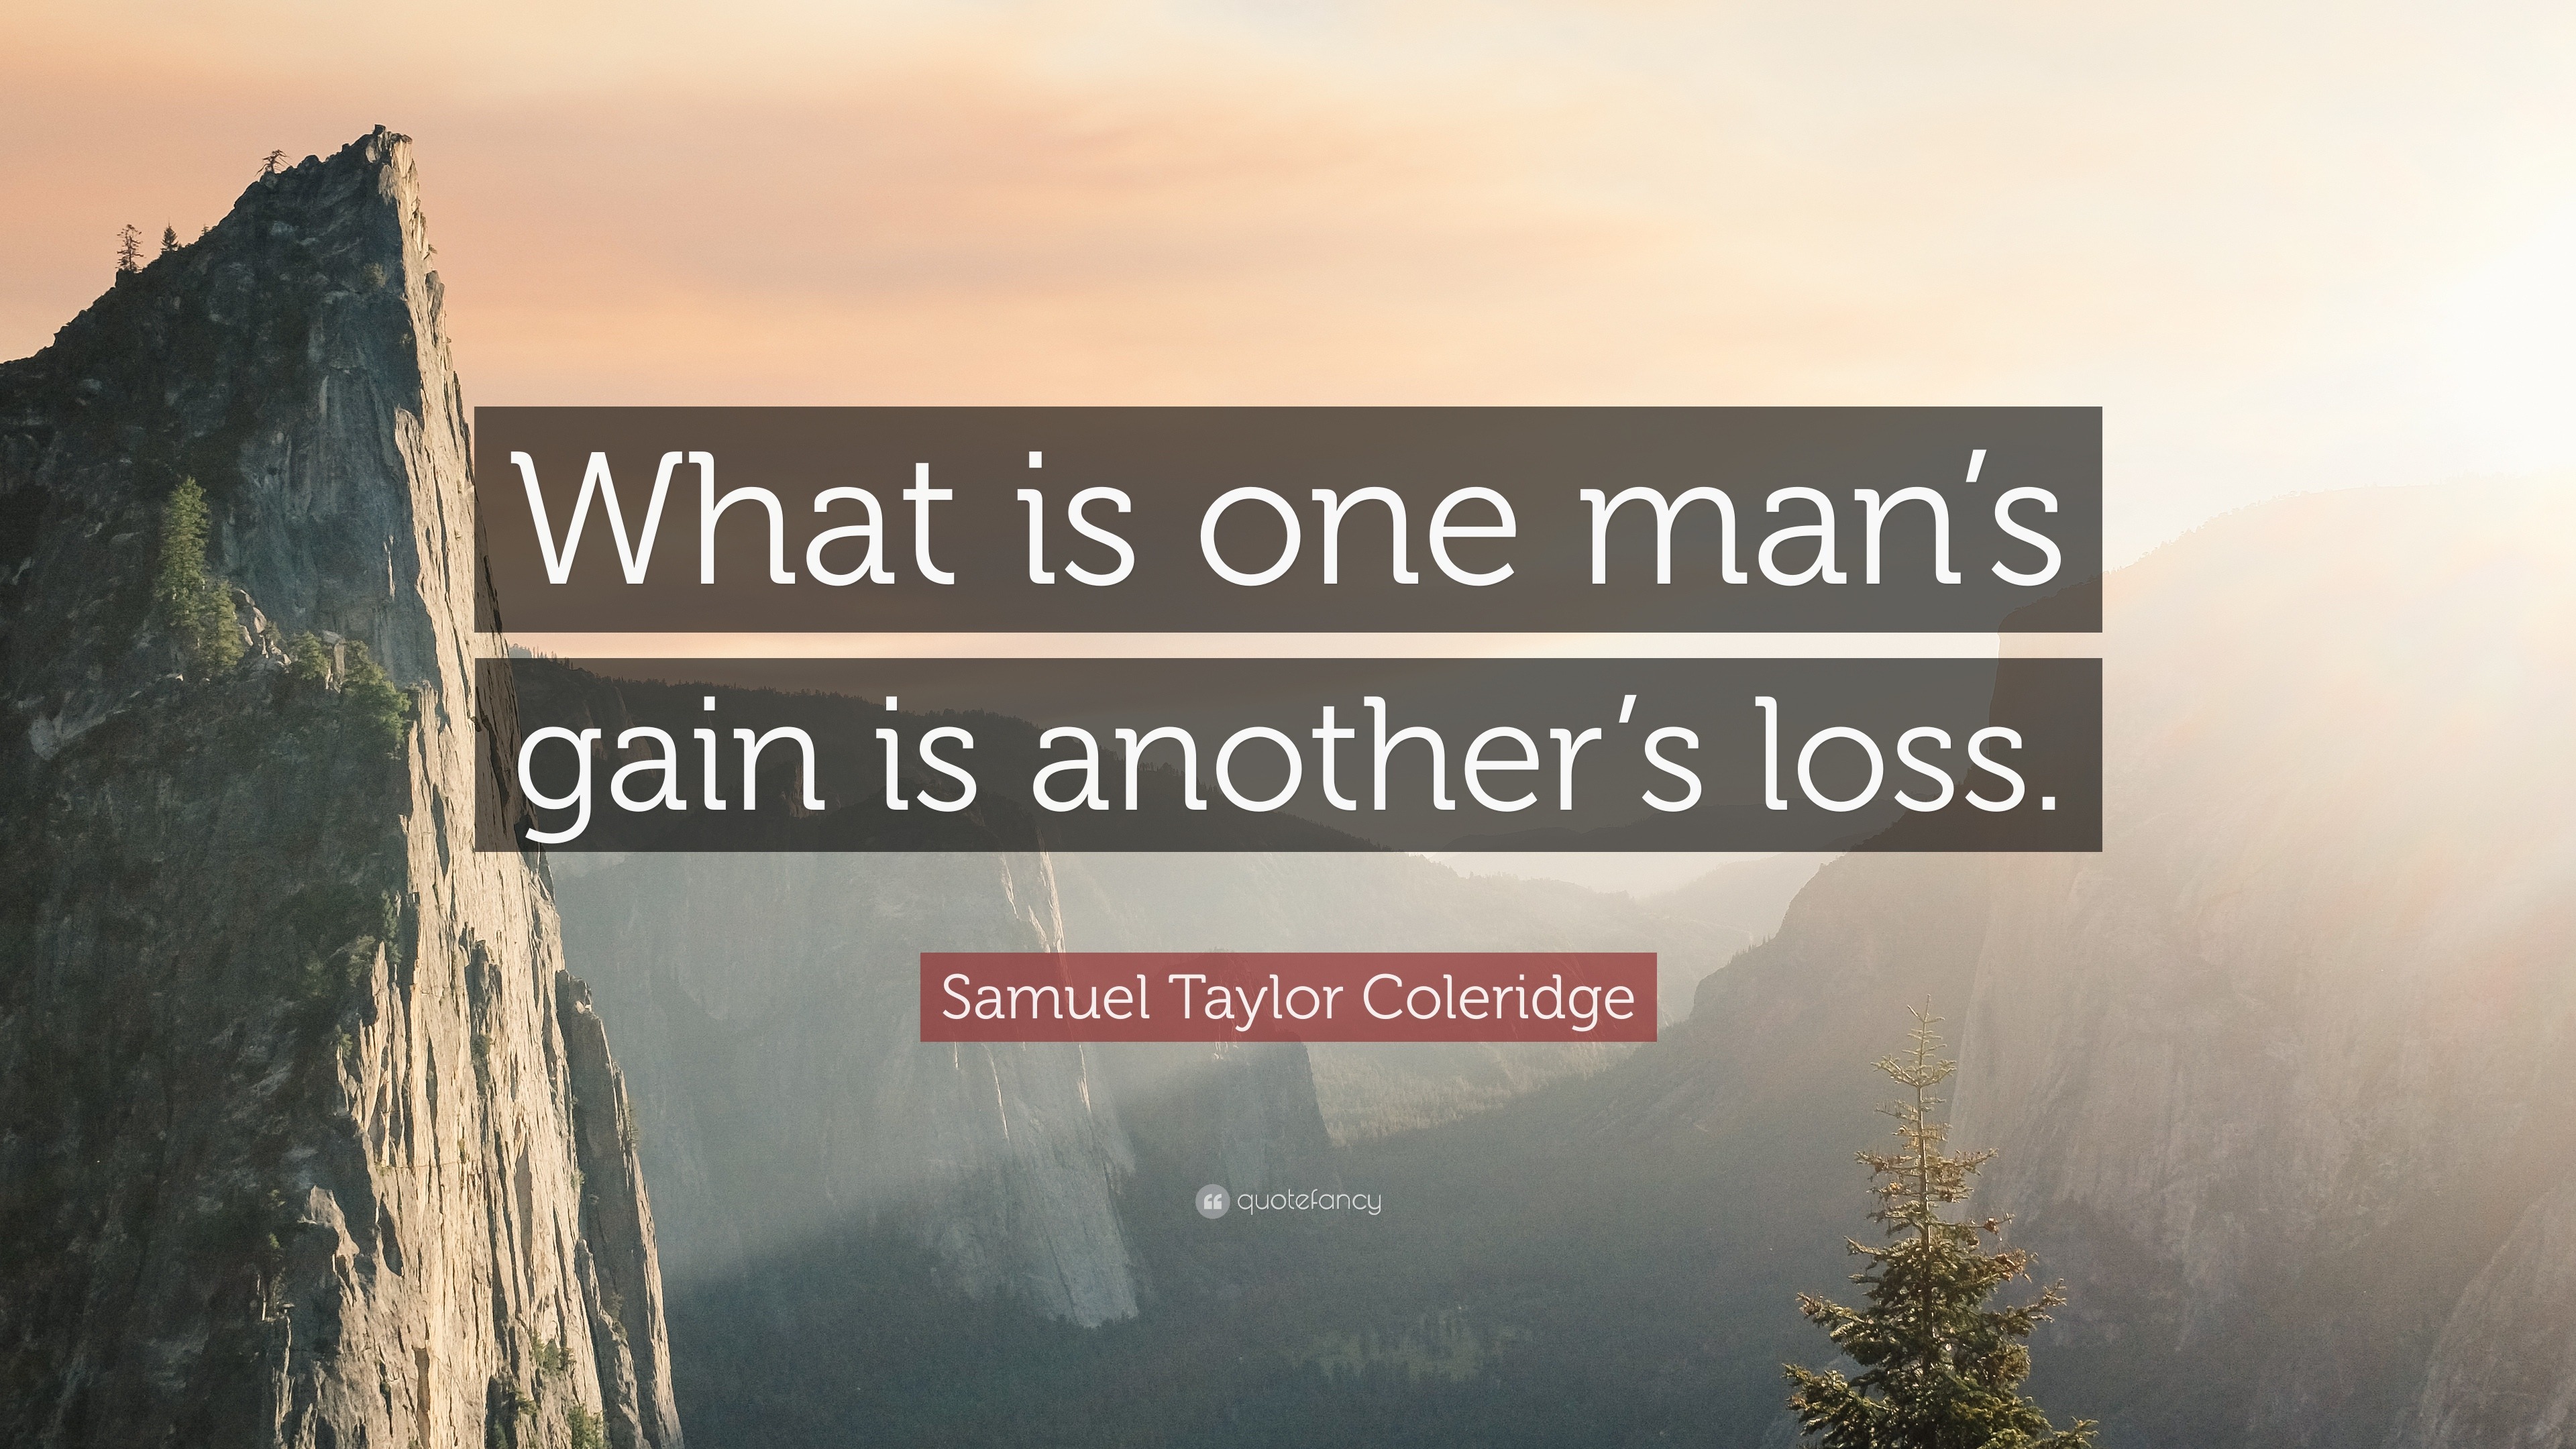 Samuel Taylor Coleridge Quote: “What is one man's gain is another's loss.”